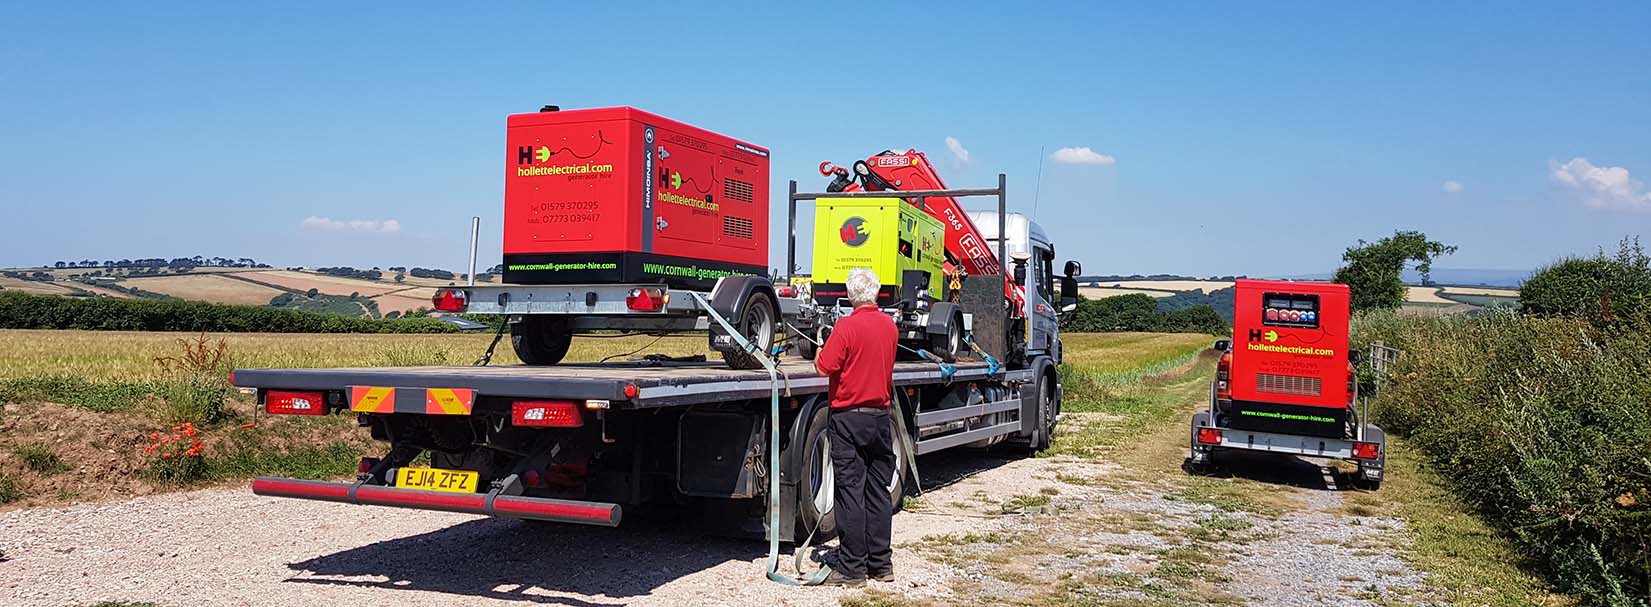 Generator delivery to film location